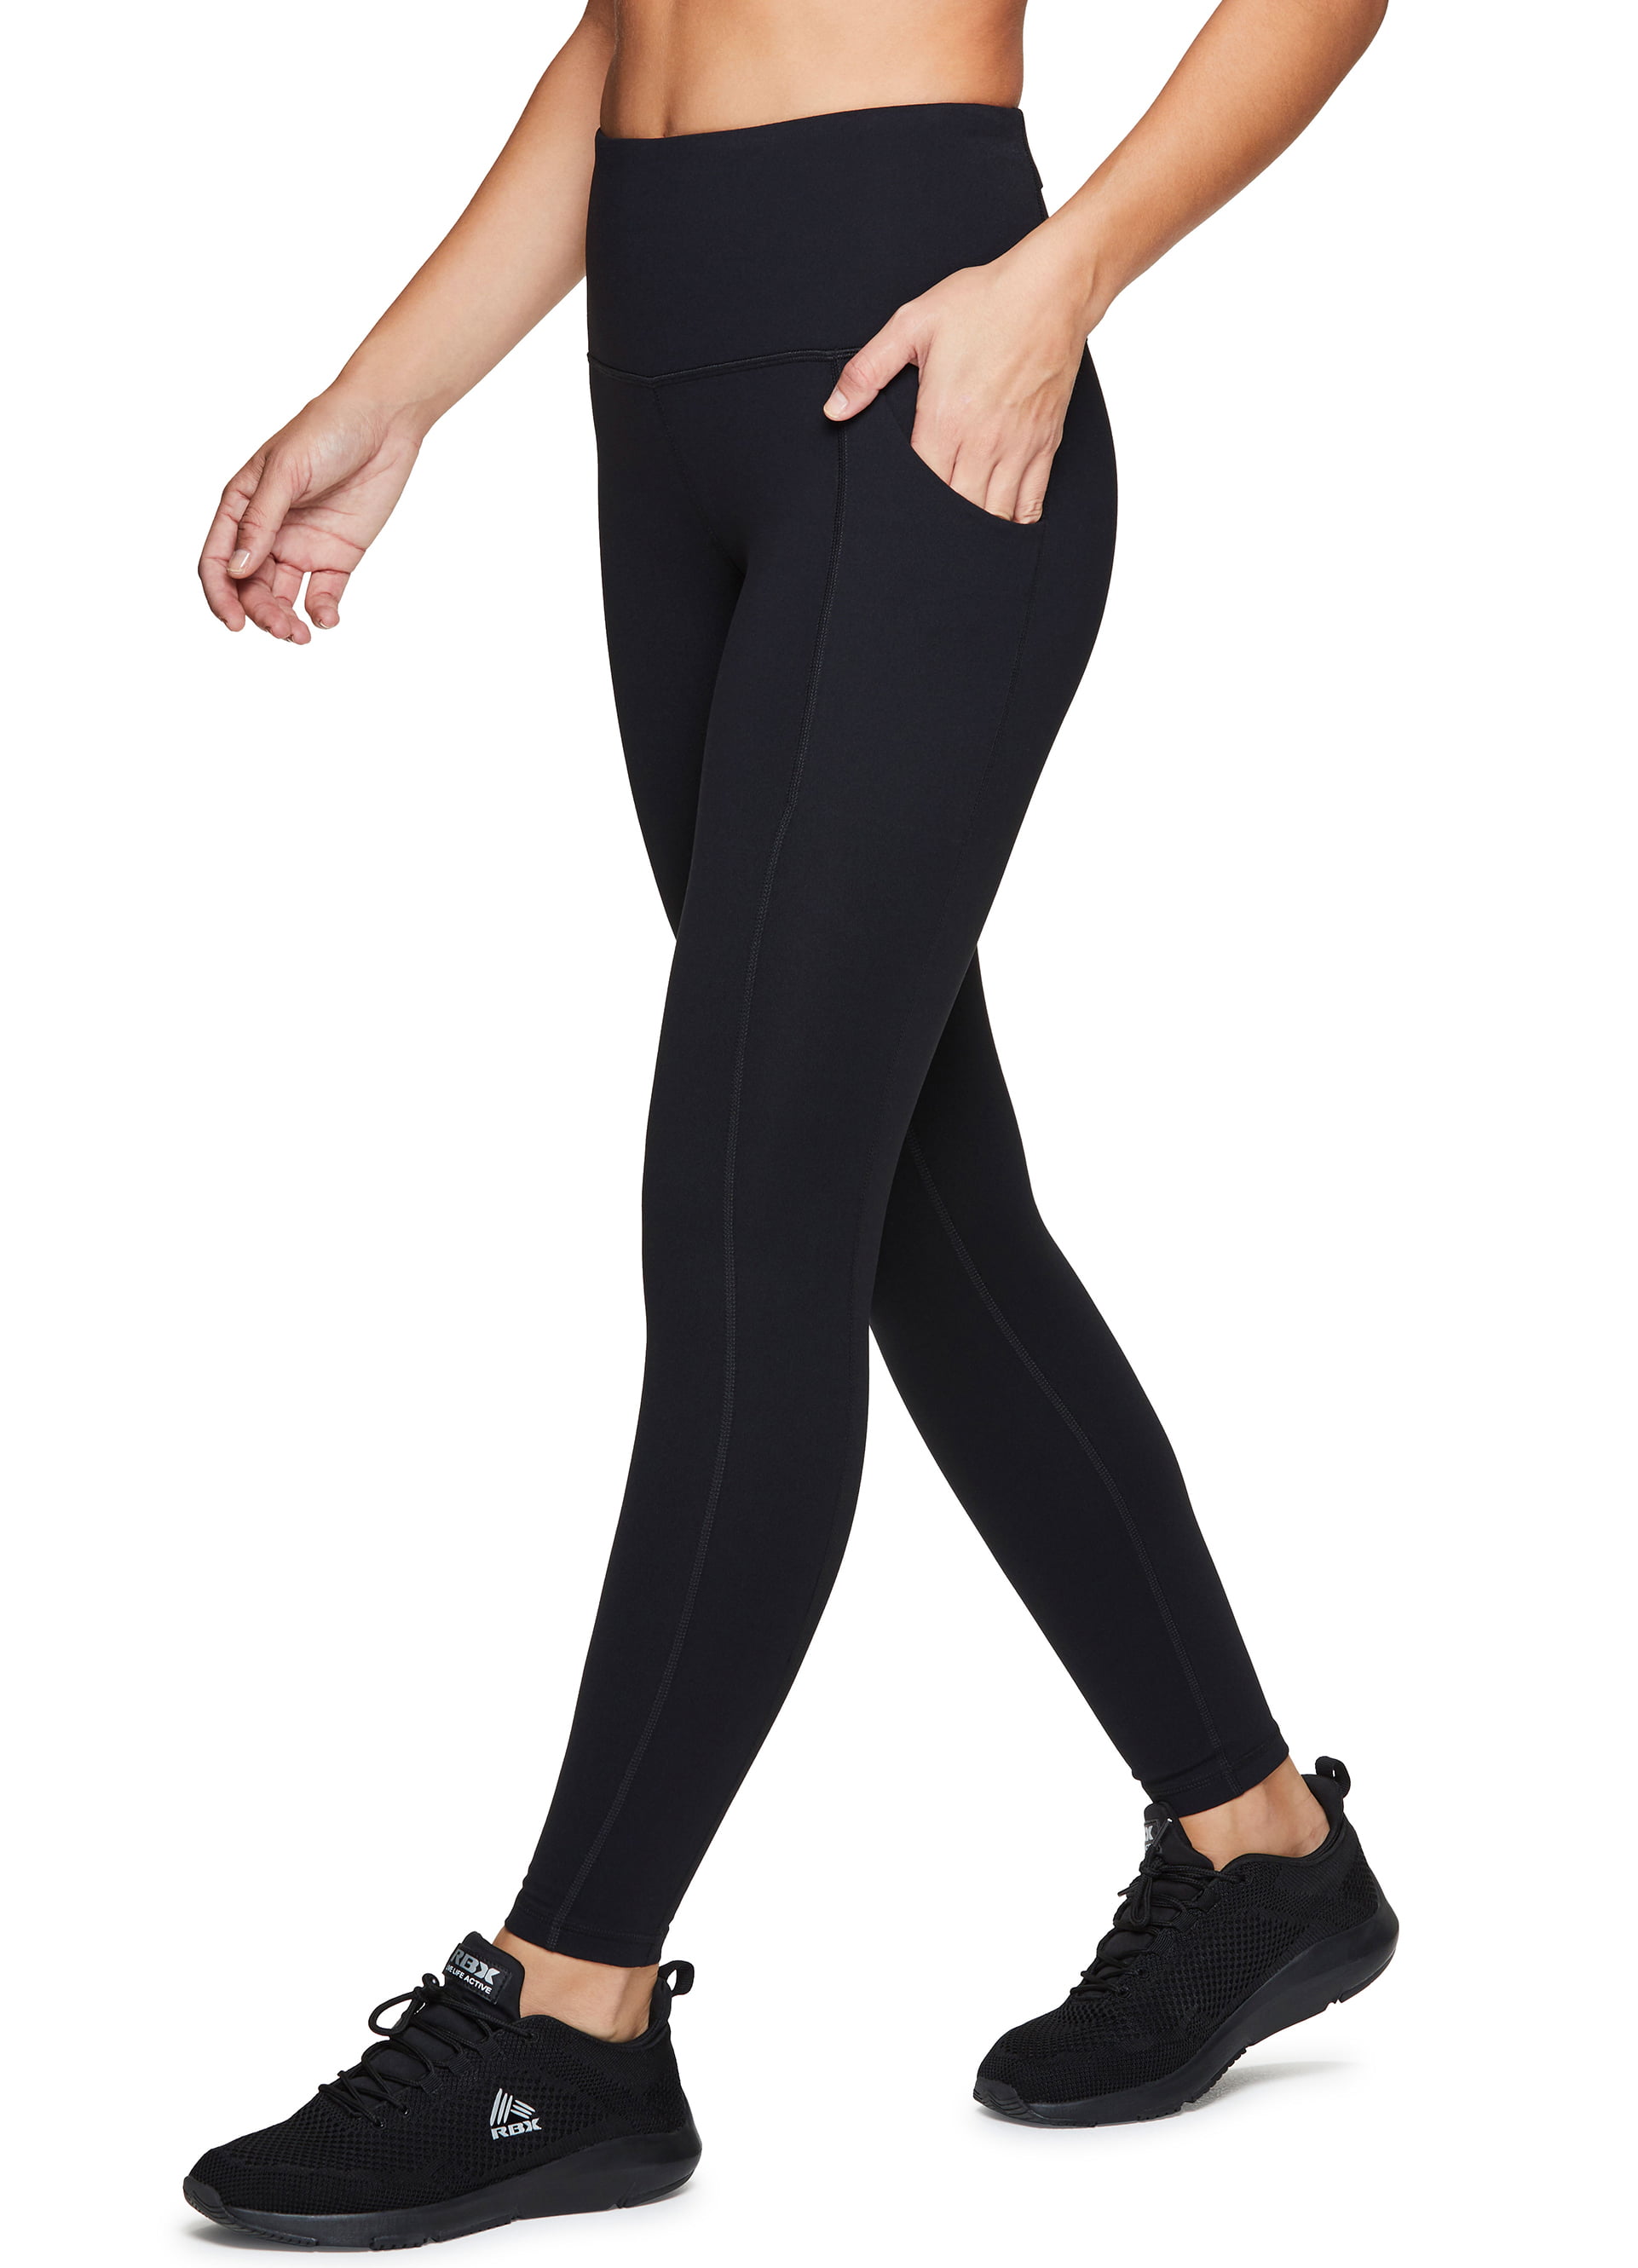 RBX Active Womens Power Hold High Waist Athletic Leggings with Pockets